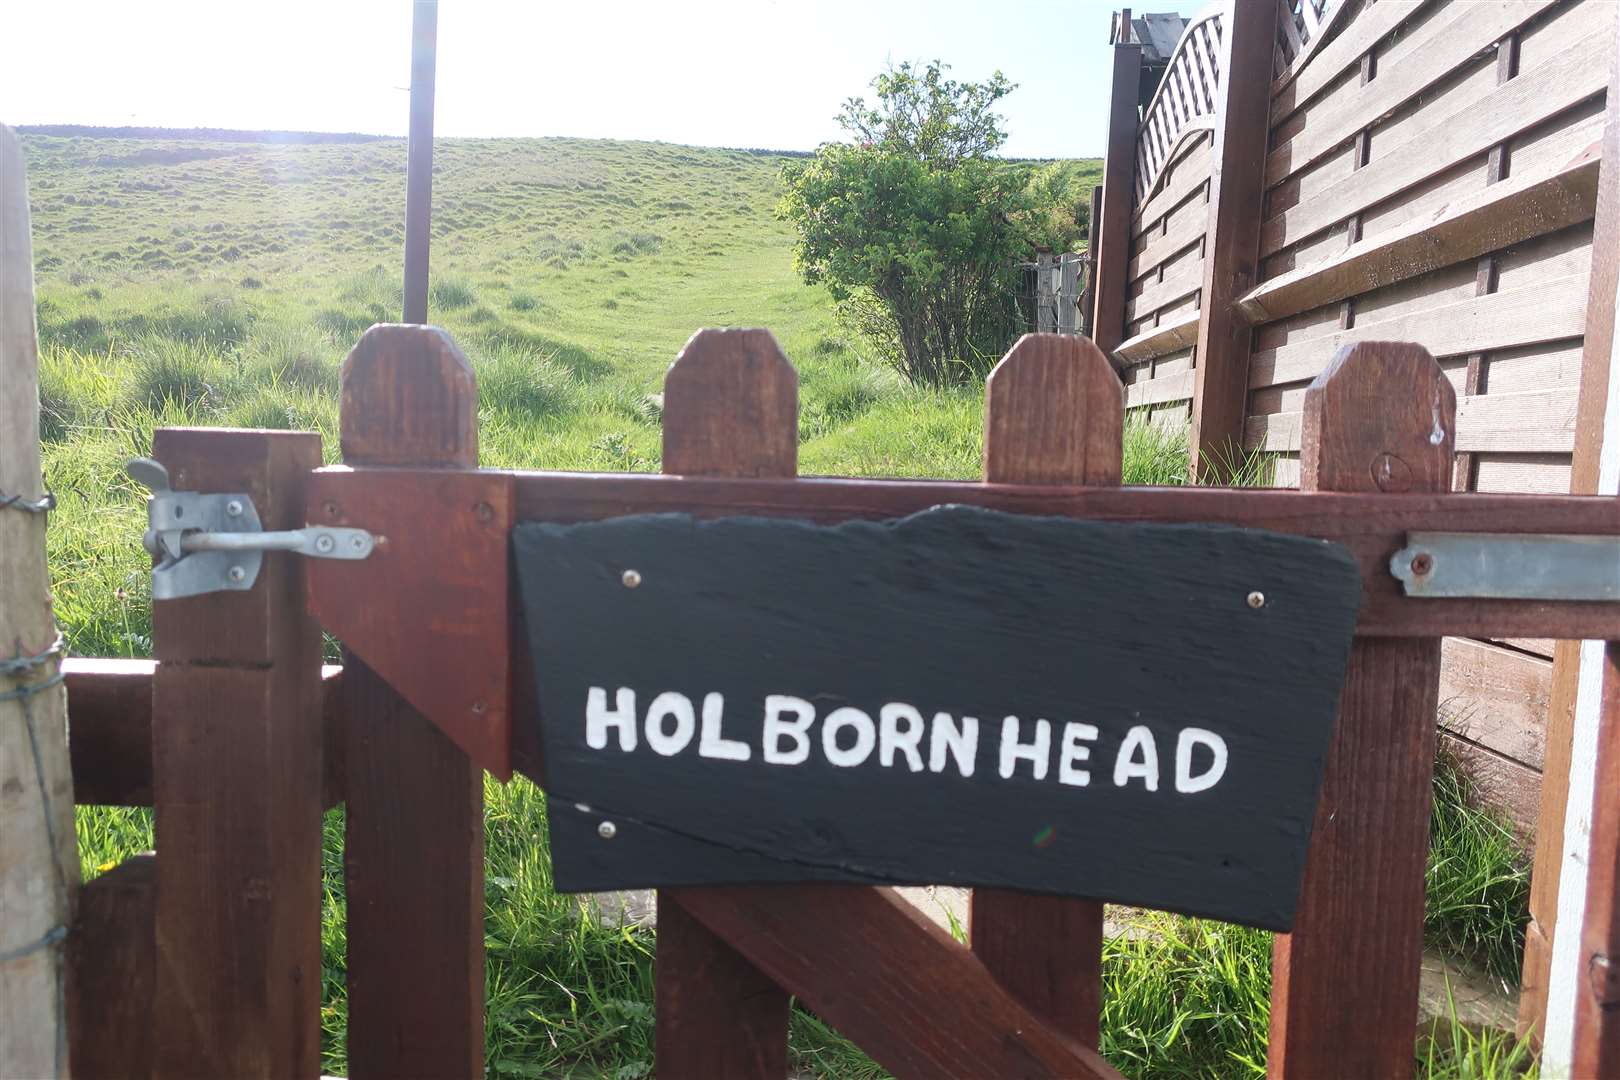 Holborn Head marker on the gate beside the lighthouse. Picture: John Davidson